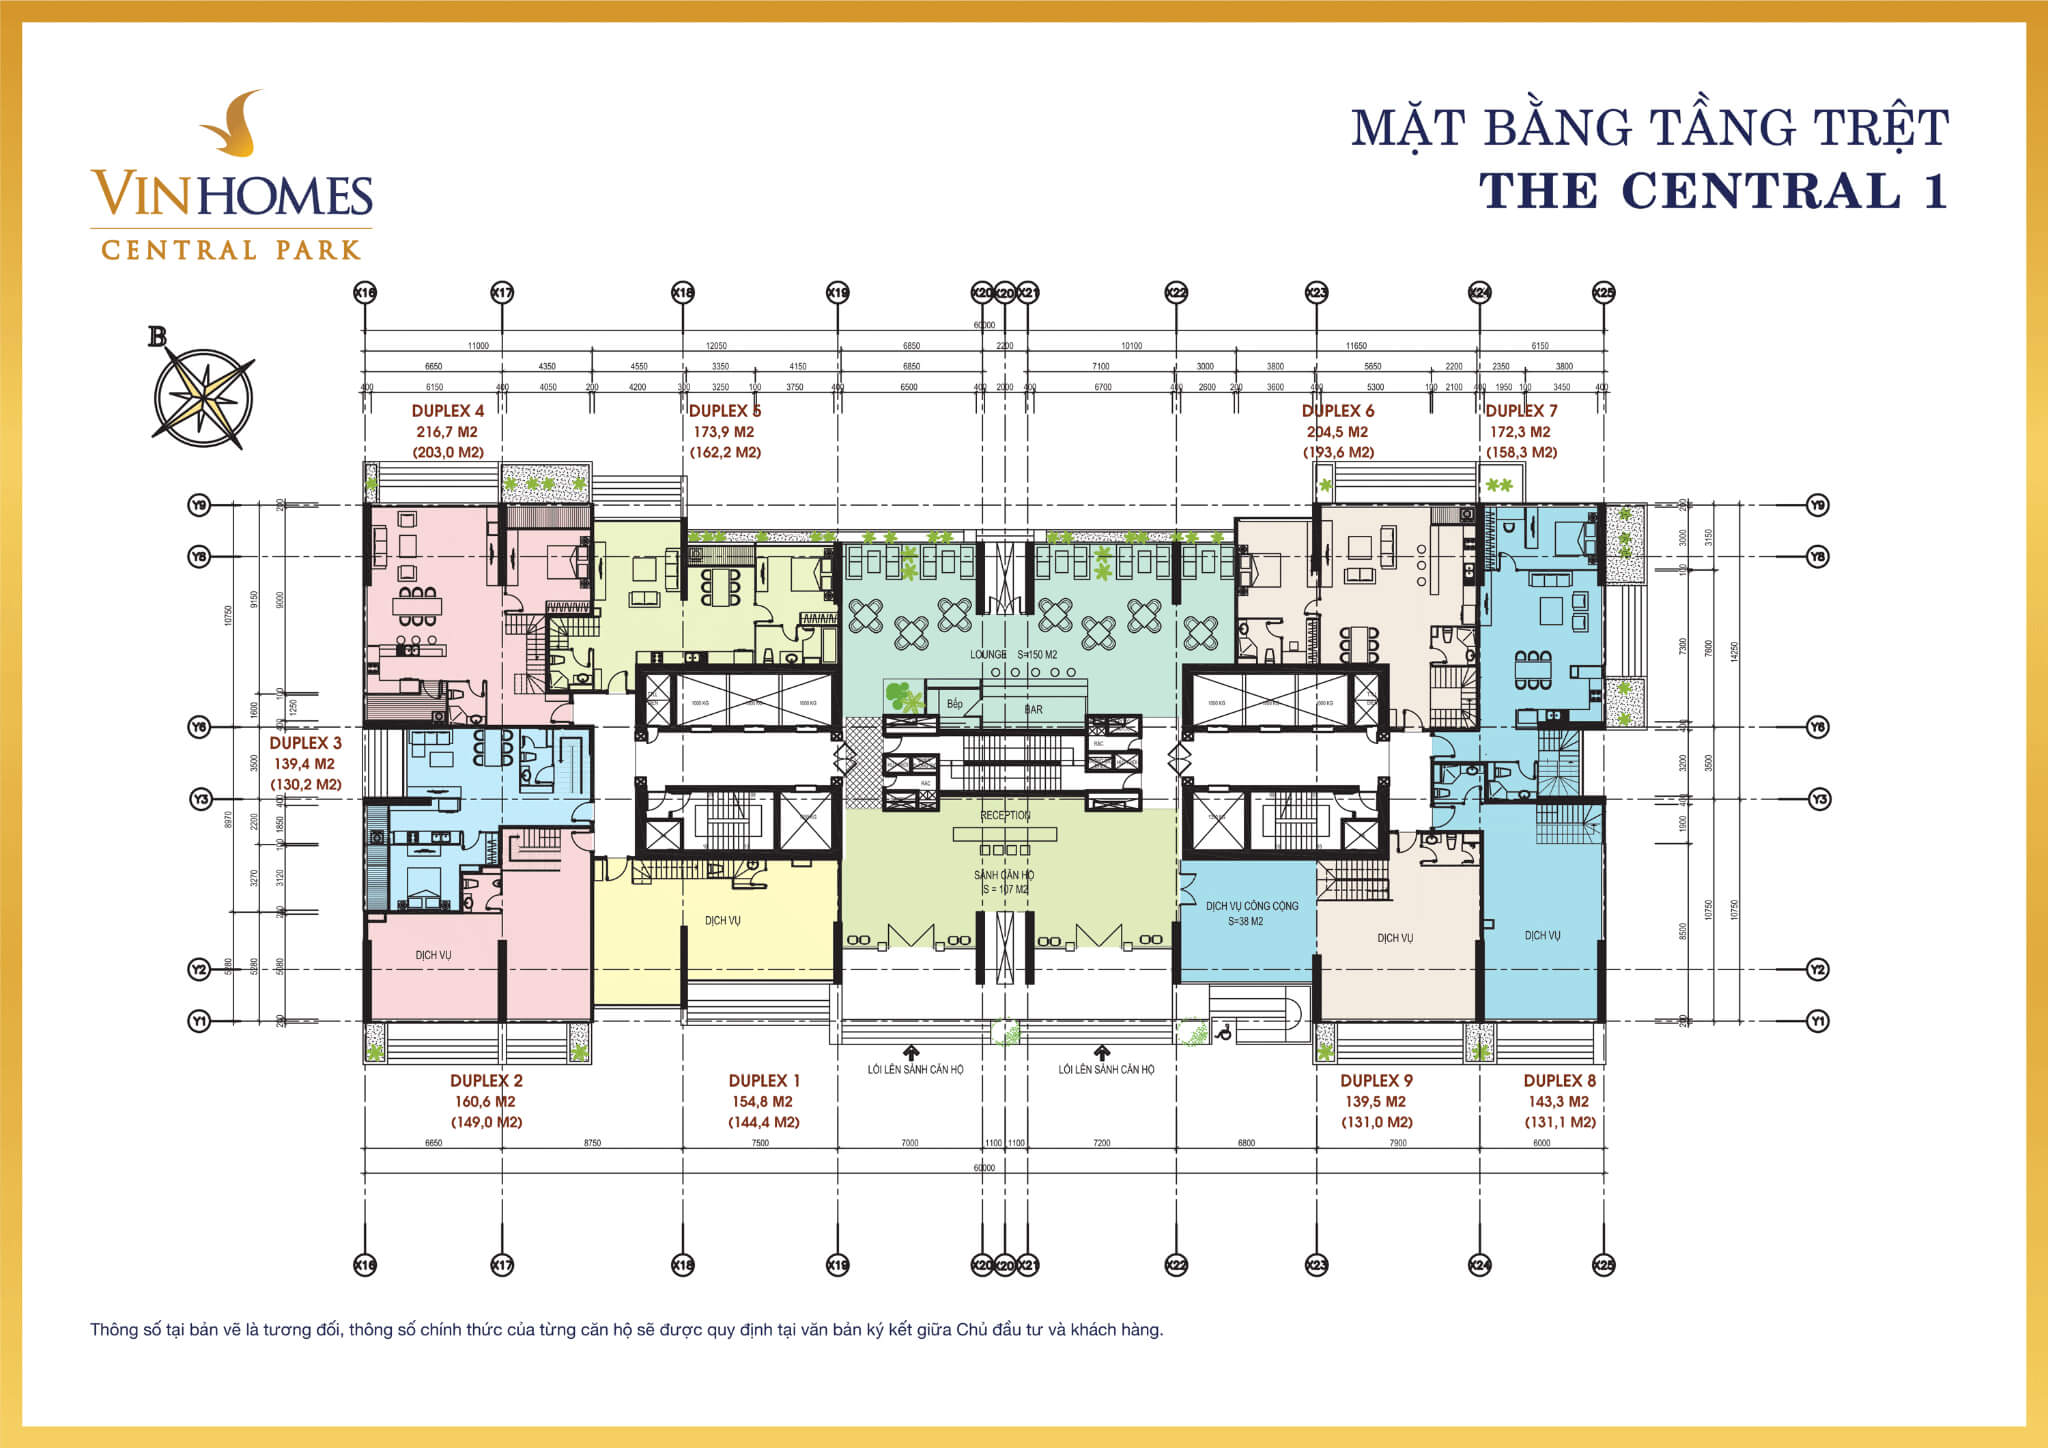 Mặt bằng layout tòa The Central 1 tầng trệt tại Vinhomes Central Park